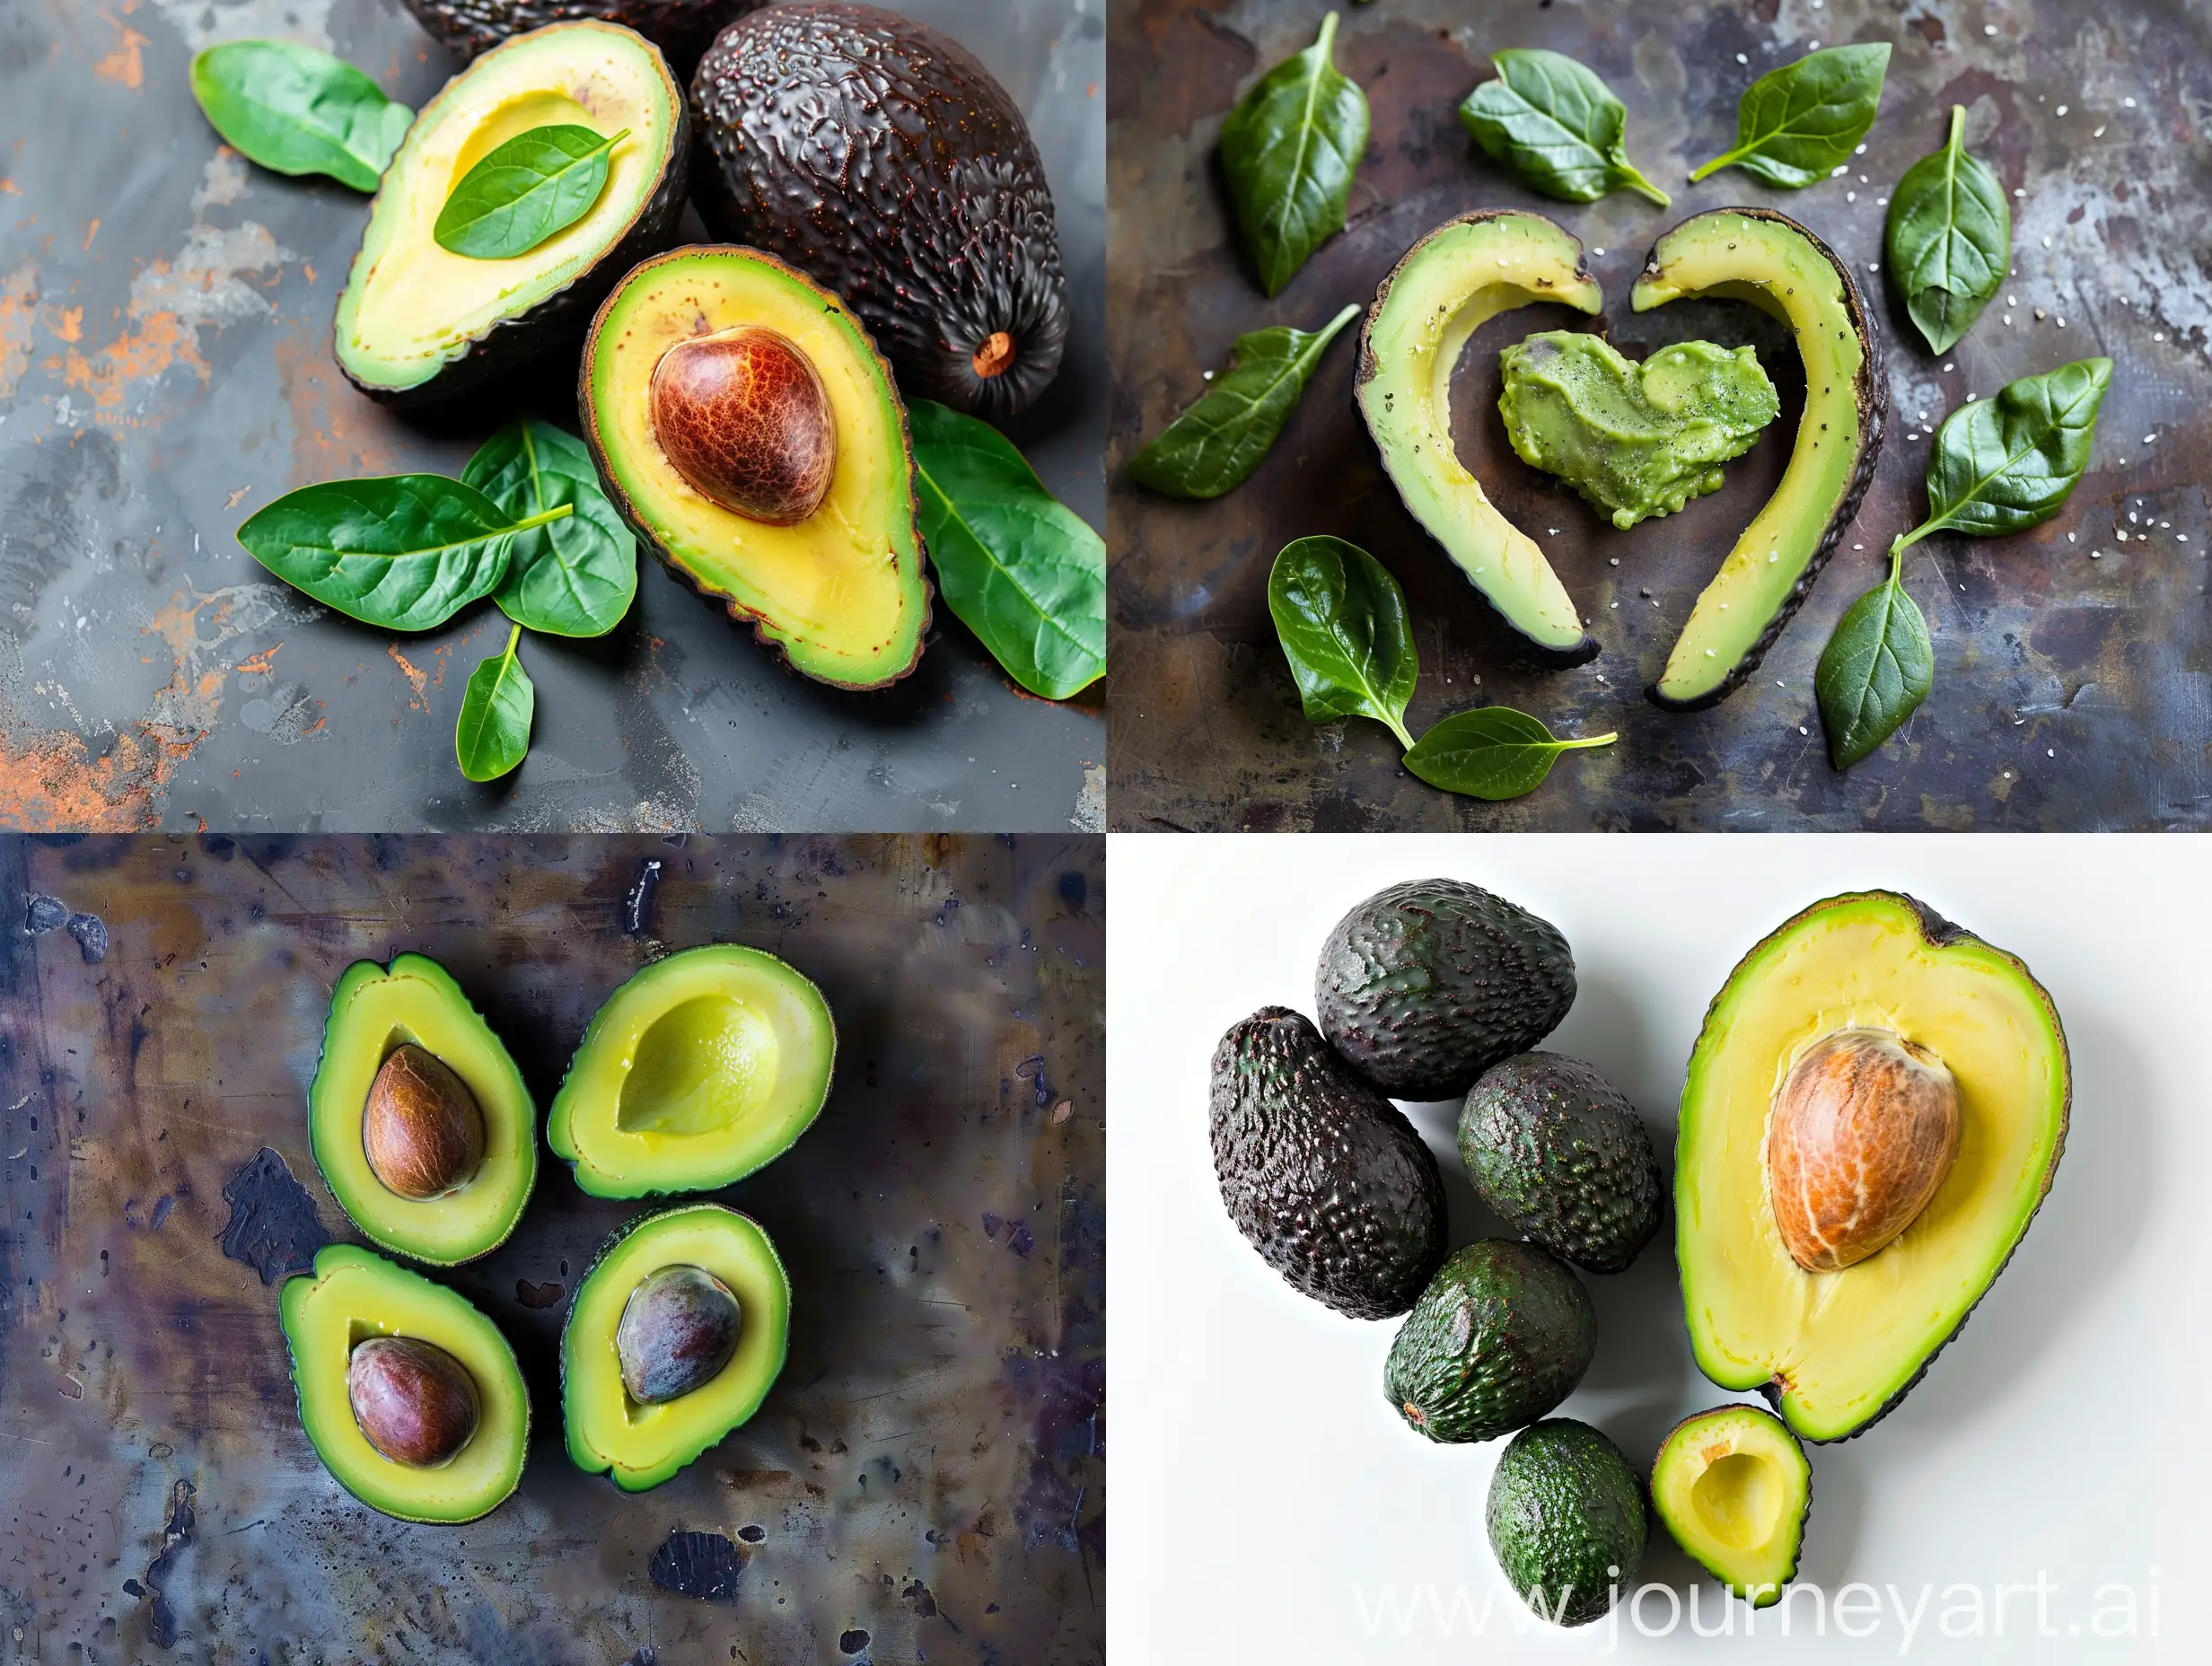 The real poster about the benefits of avocados for the heart